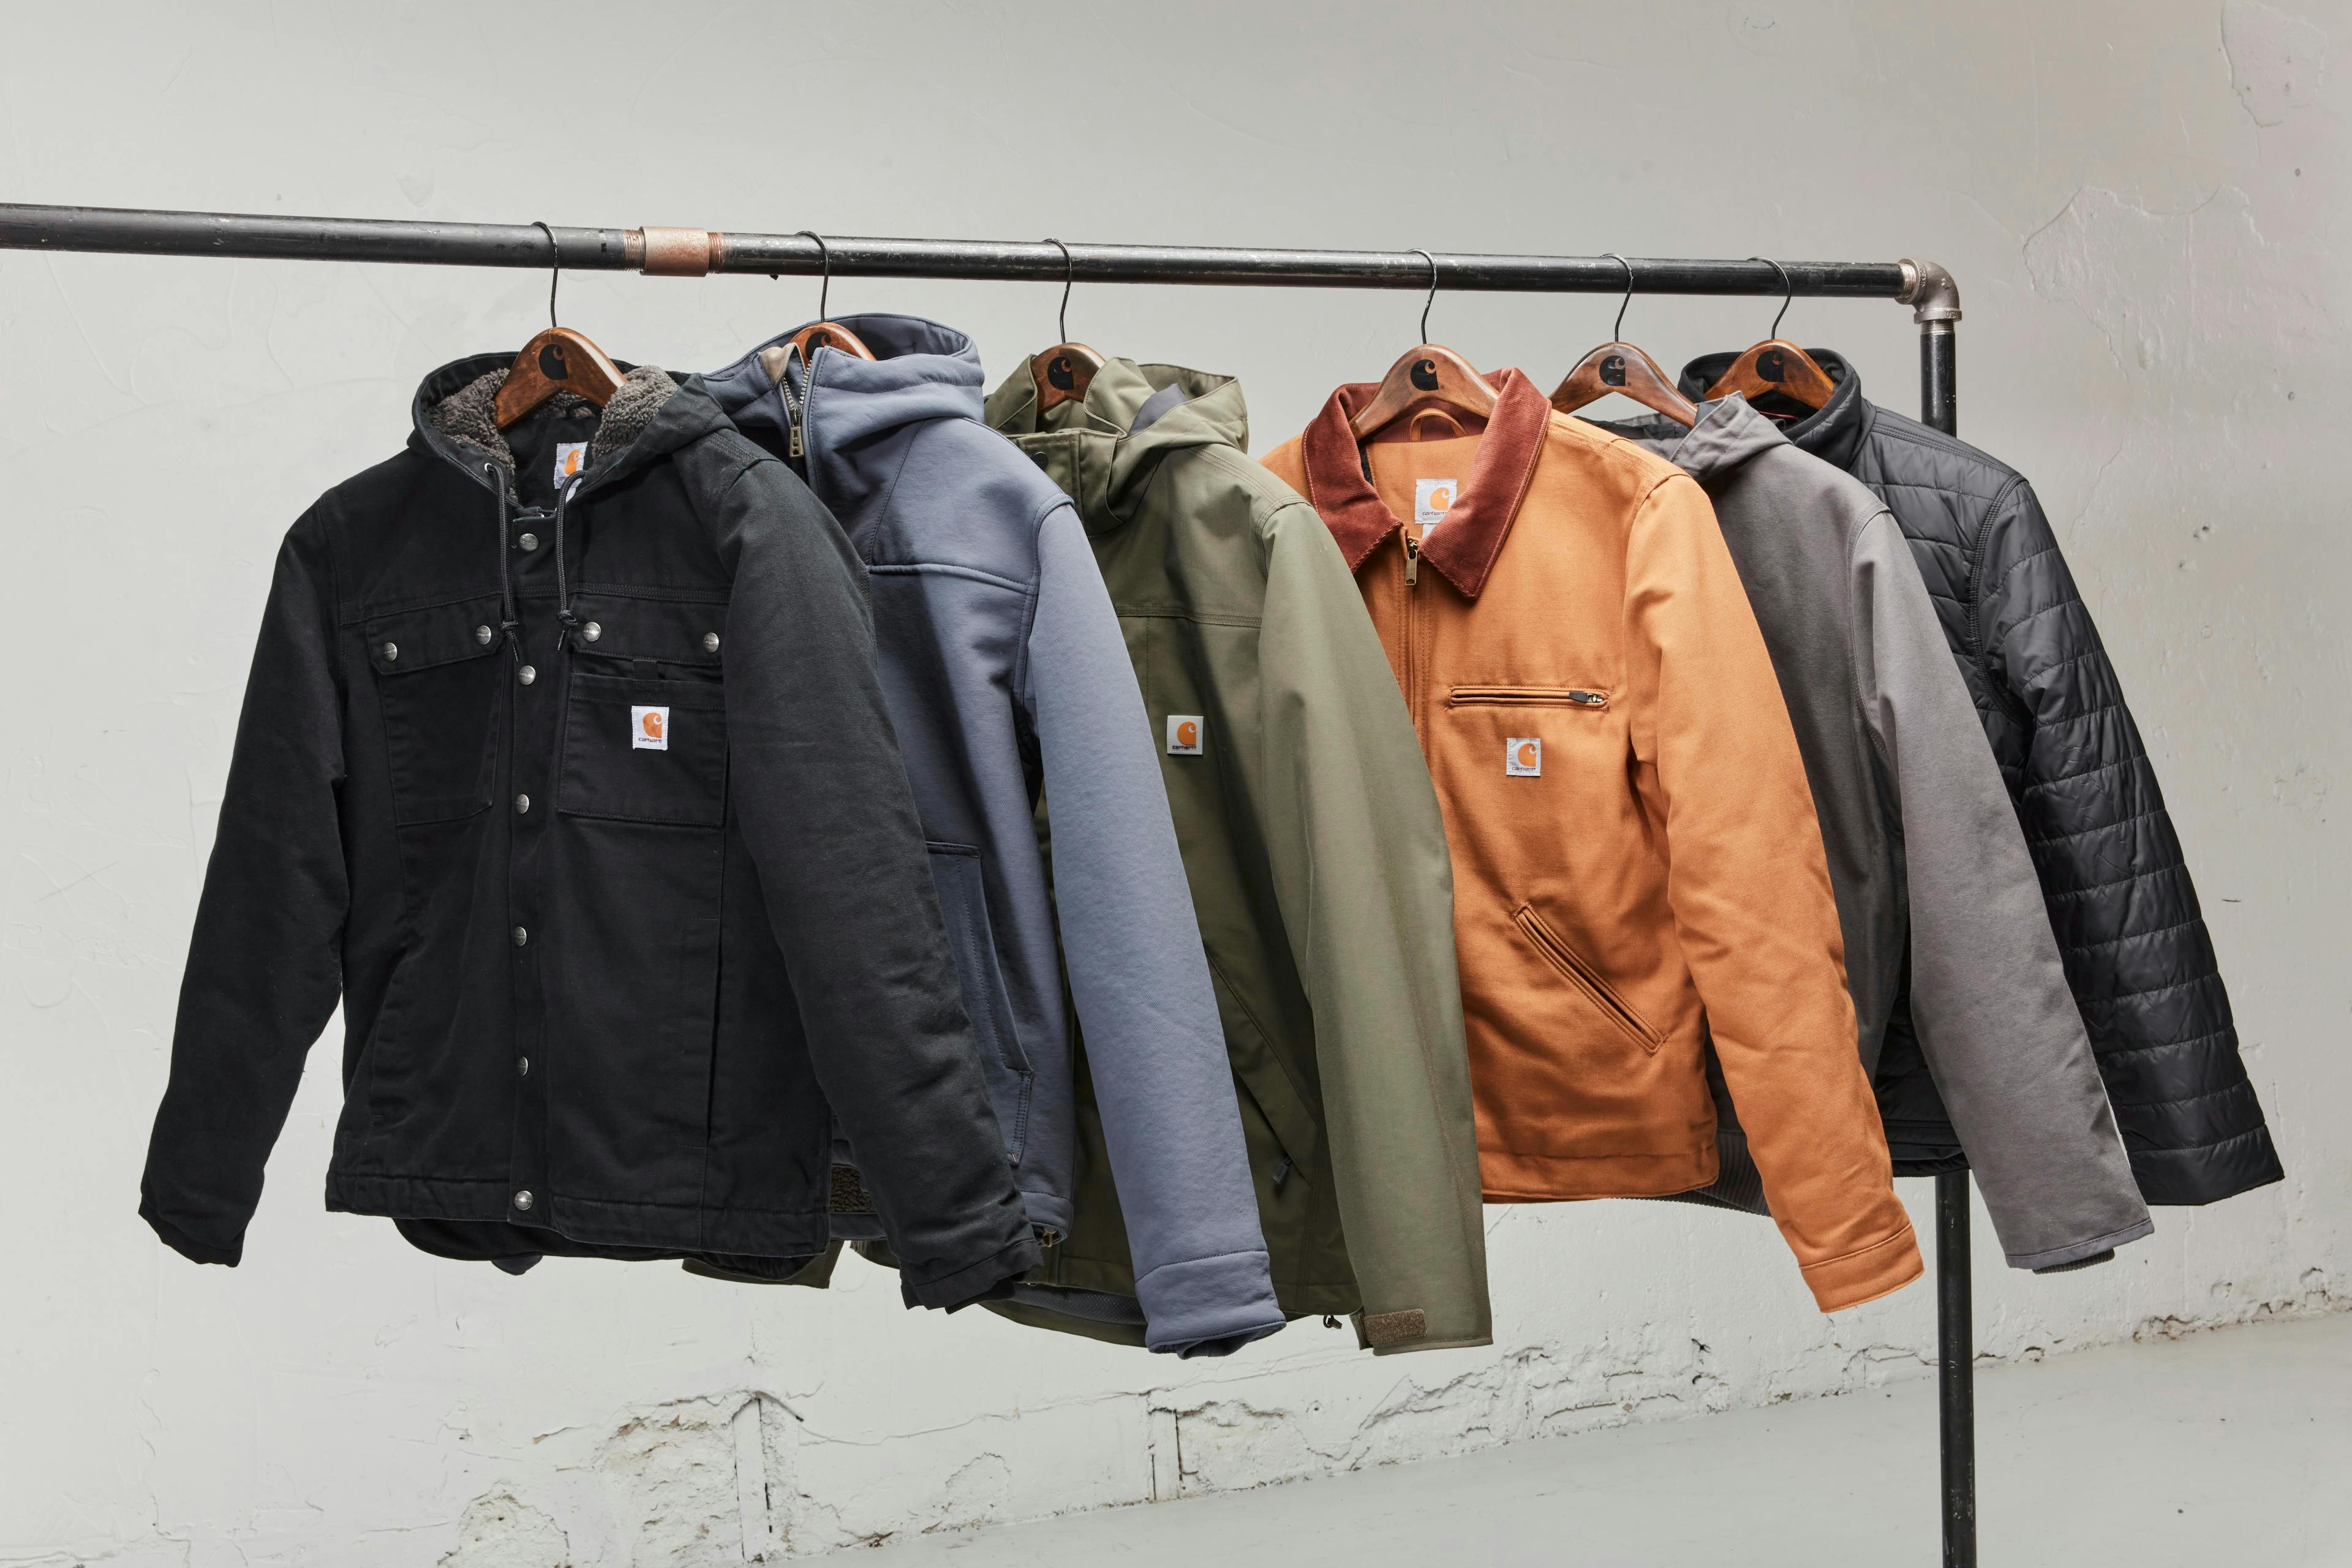 Carhartt jacket sitting on a rack for display